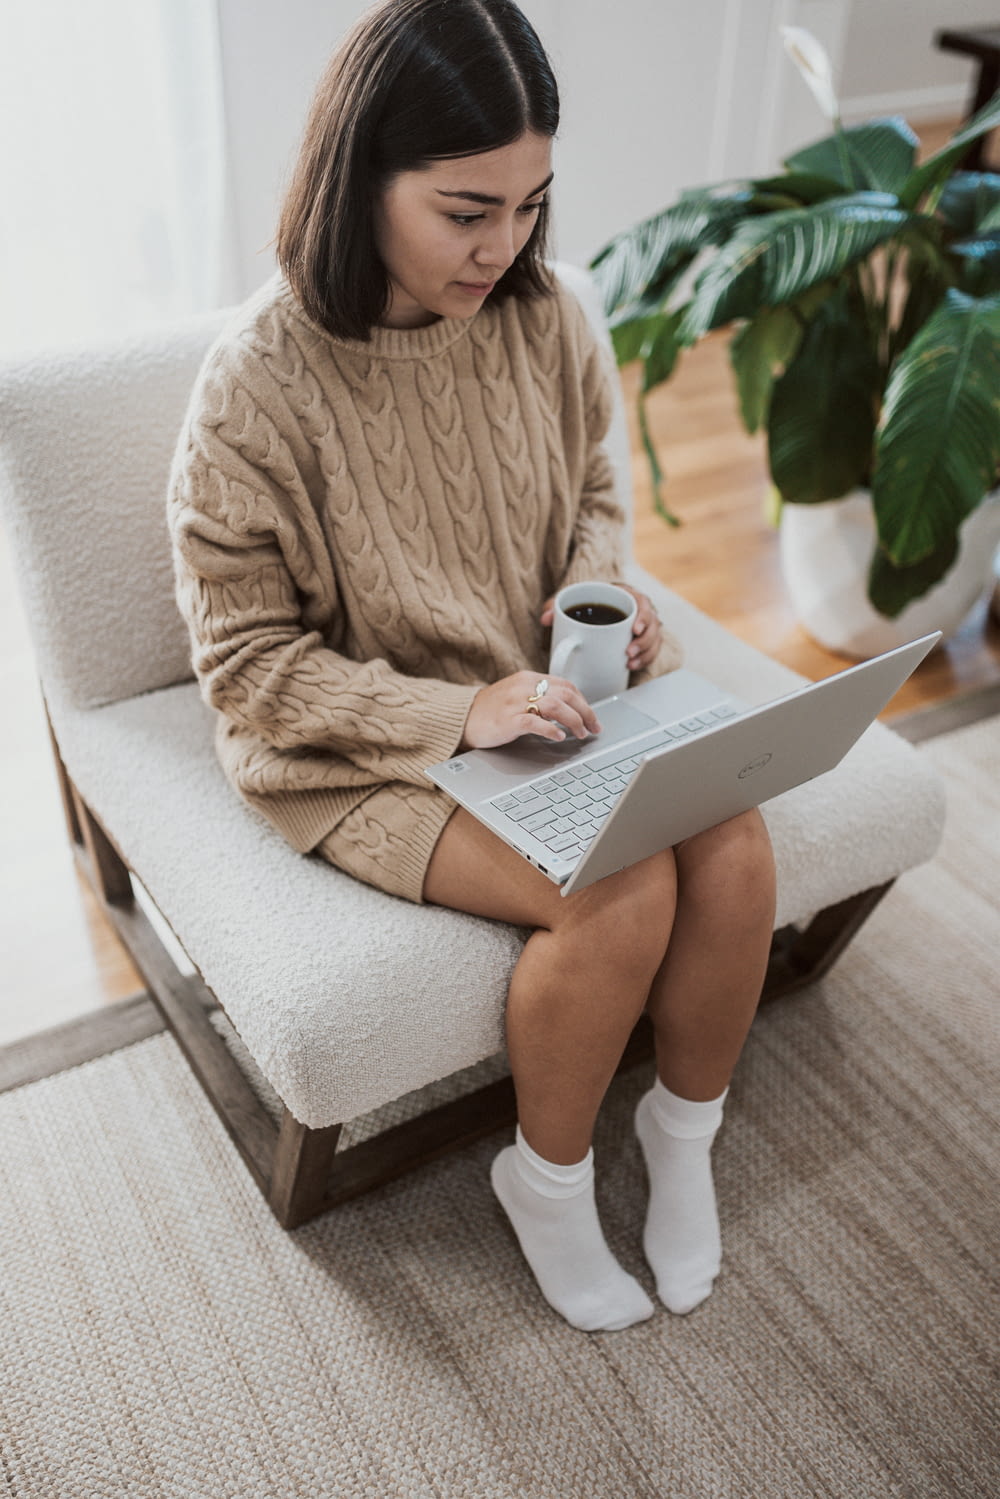 woman in white sweater sitting on couch using laptop